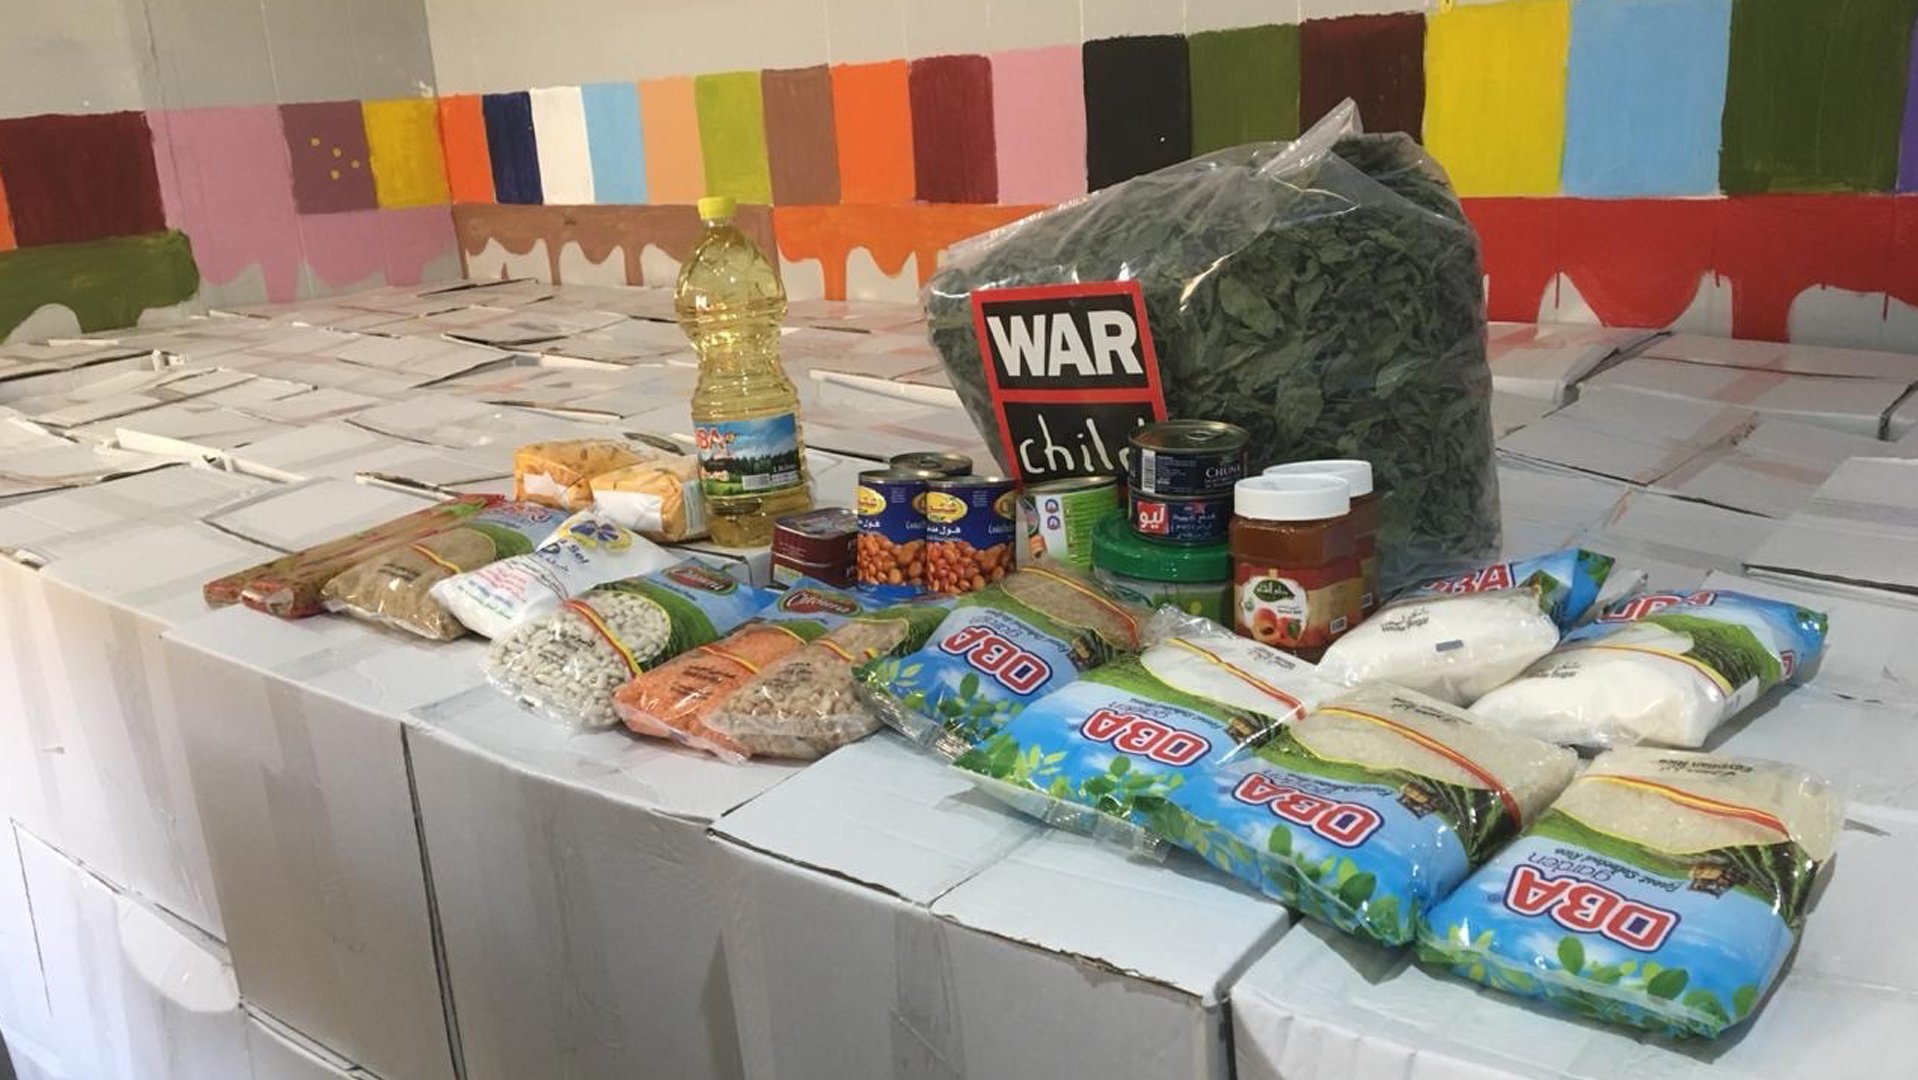 War Child is handing out emergency food packages for families in Lebanon during corona pandemic